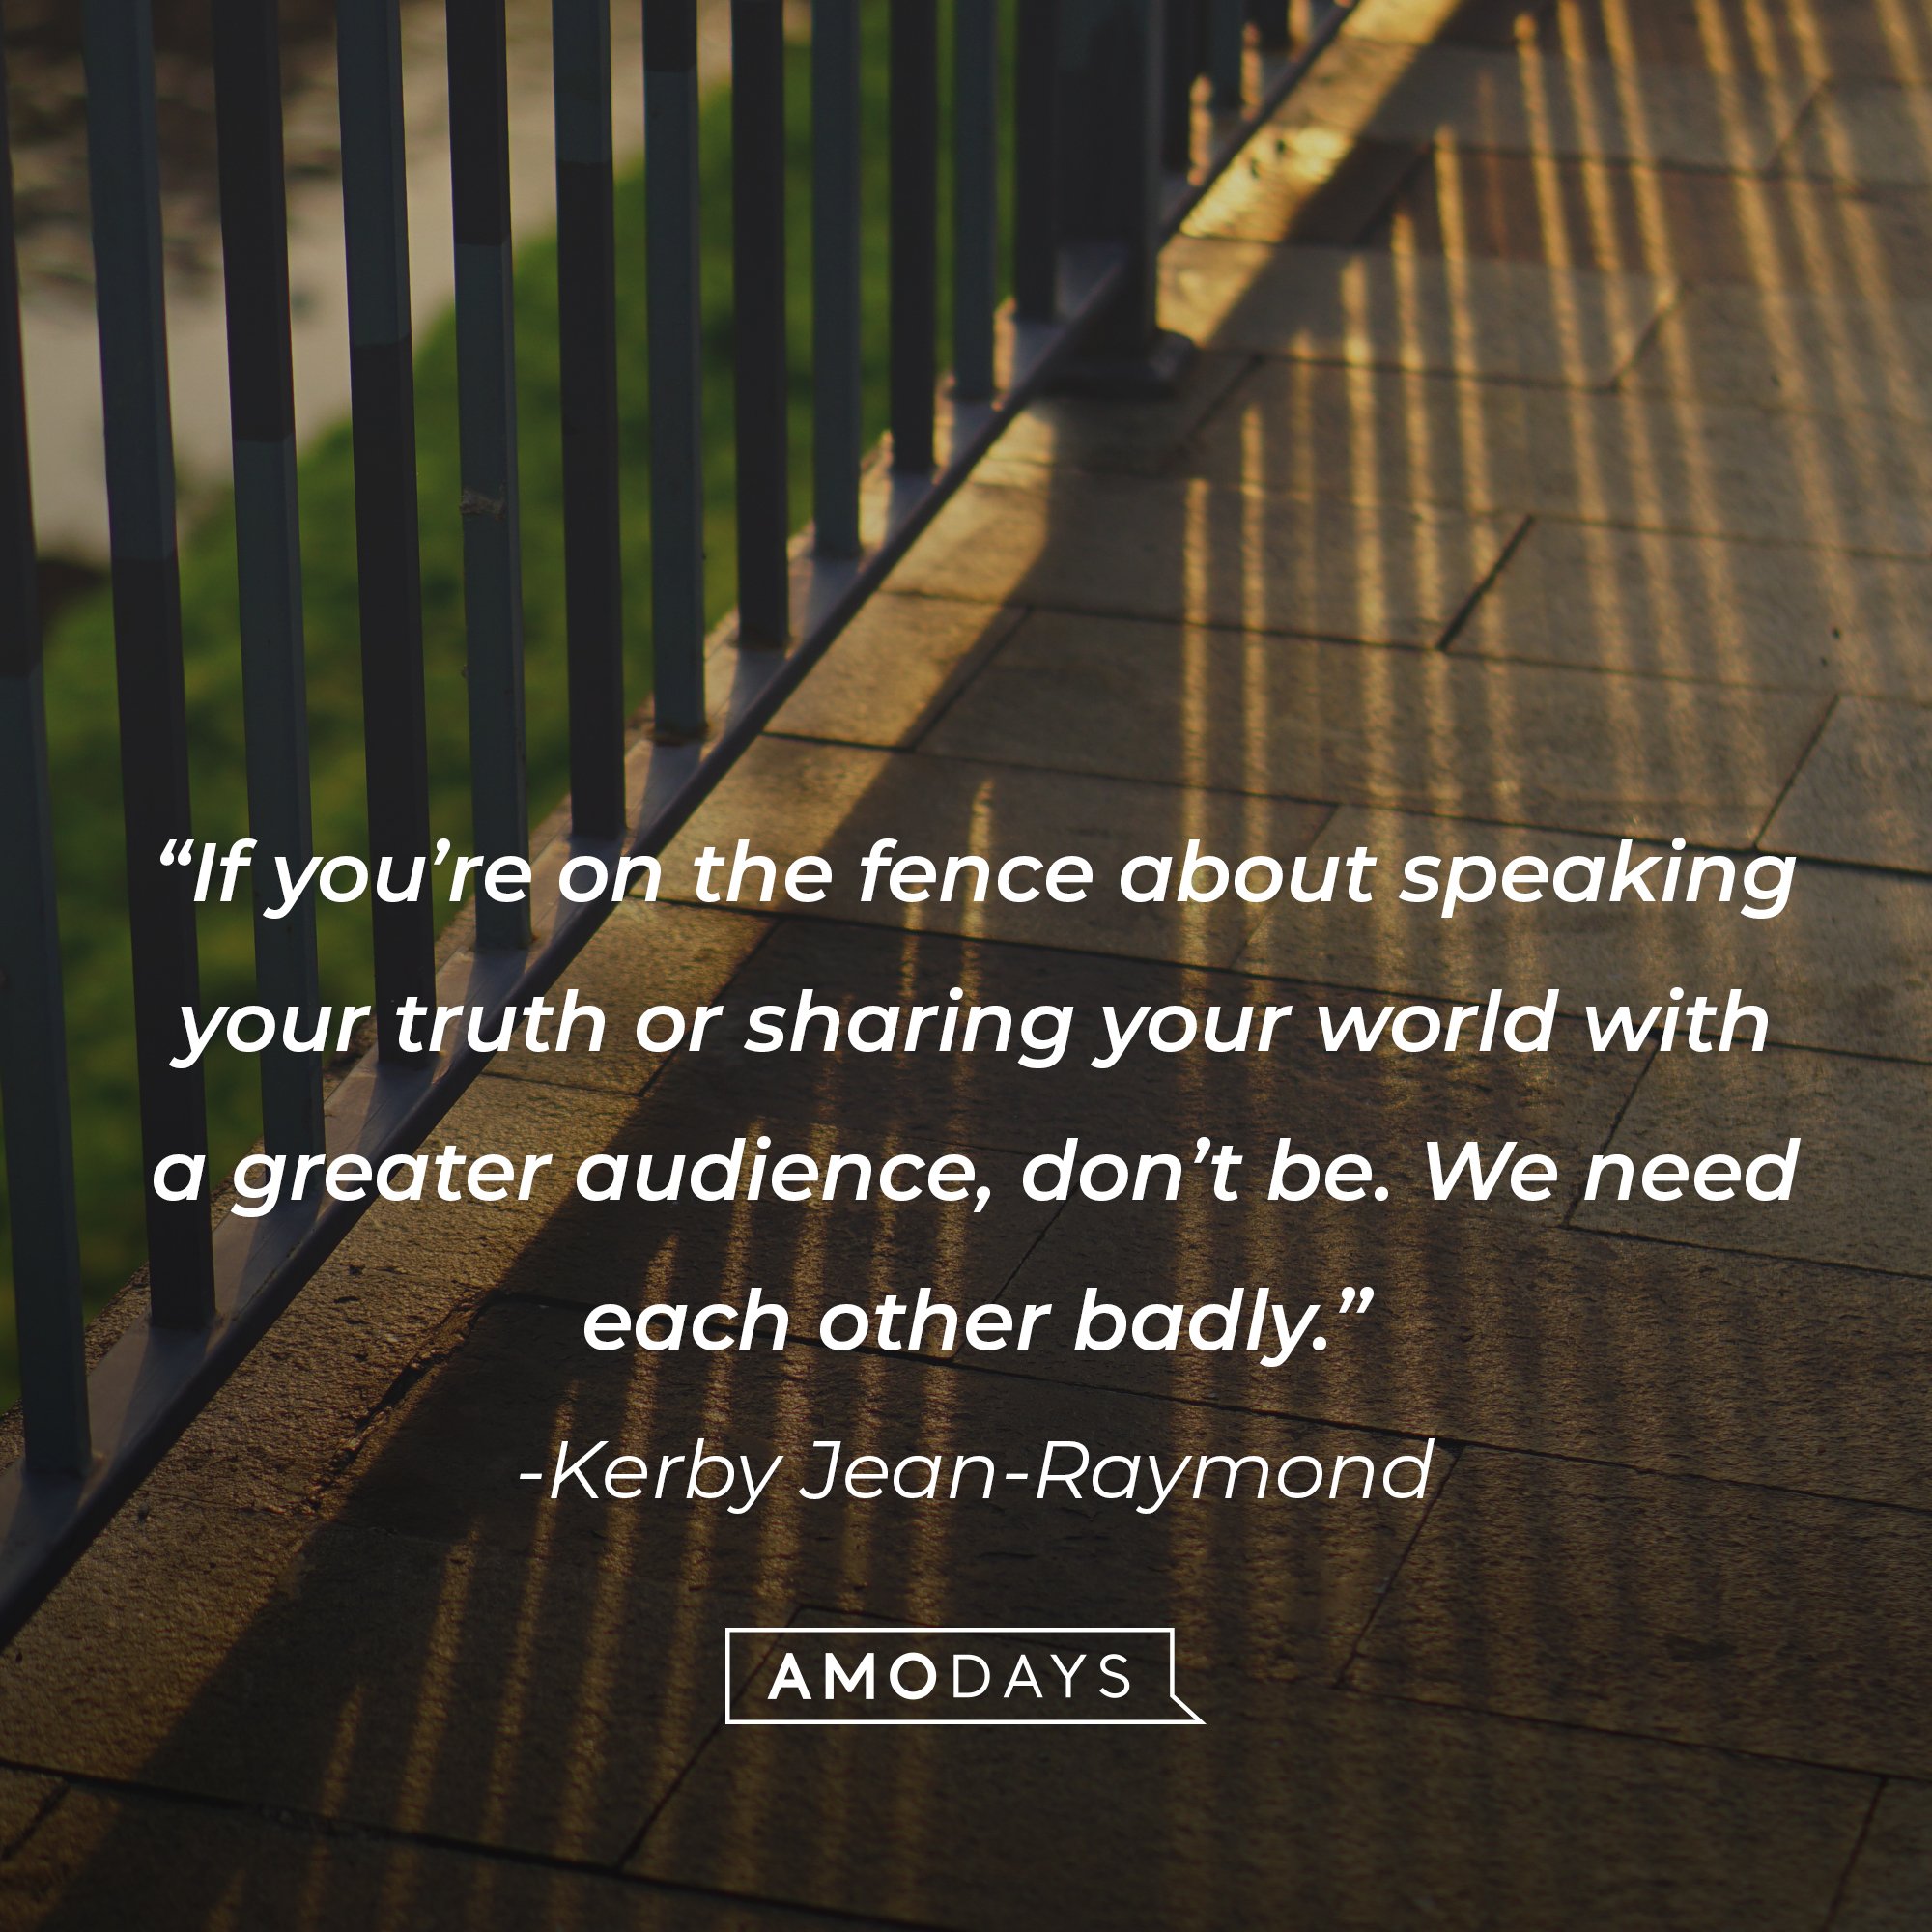 Kerby Jean-Raymond's quote: “If you’re on the fence about speaking your truth or sharing your world with a greater audience, don’t be. We need each other badly.” | Image: AmoDays